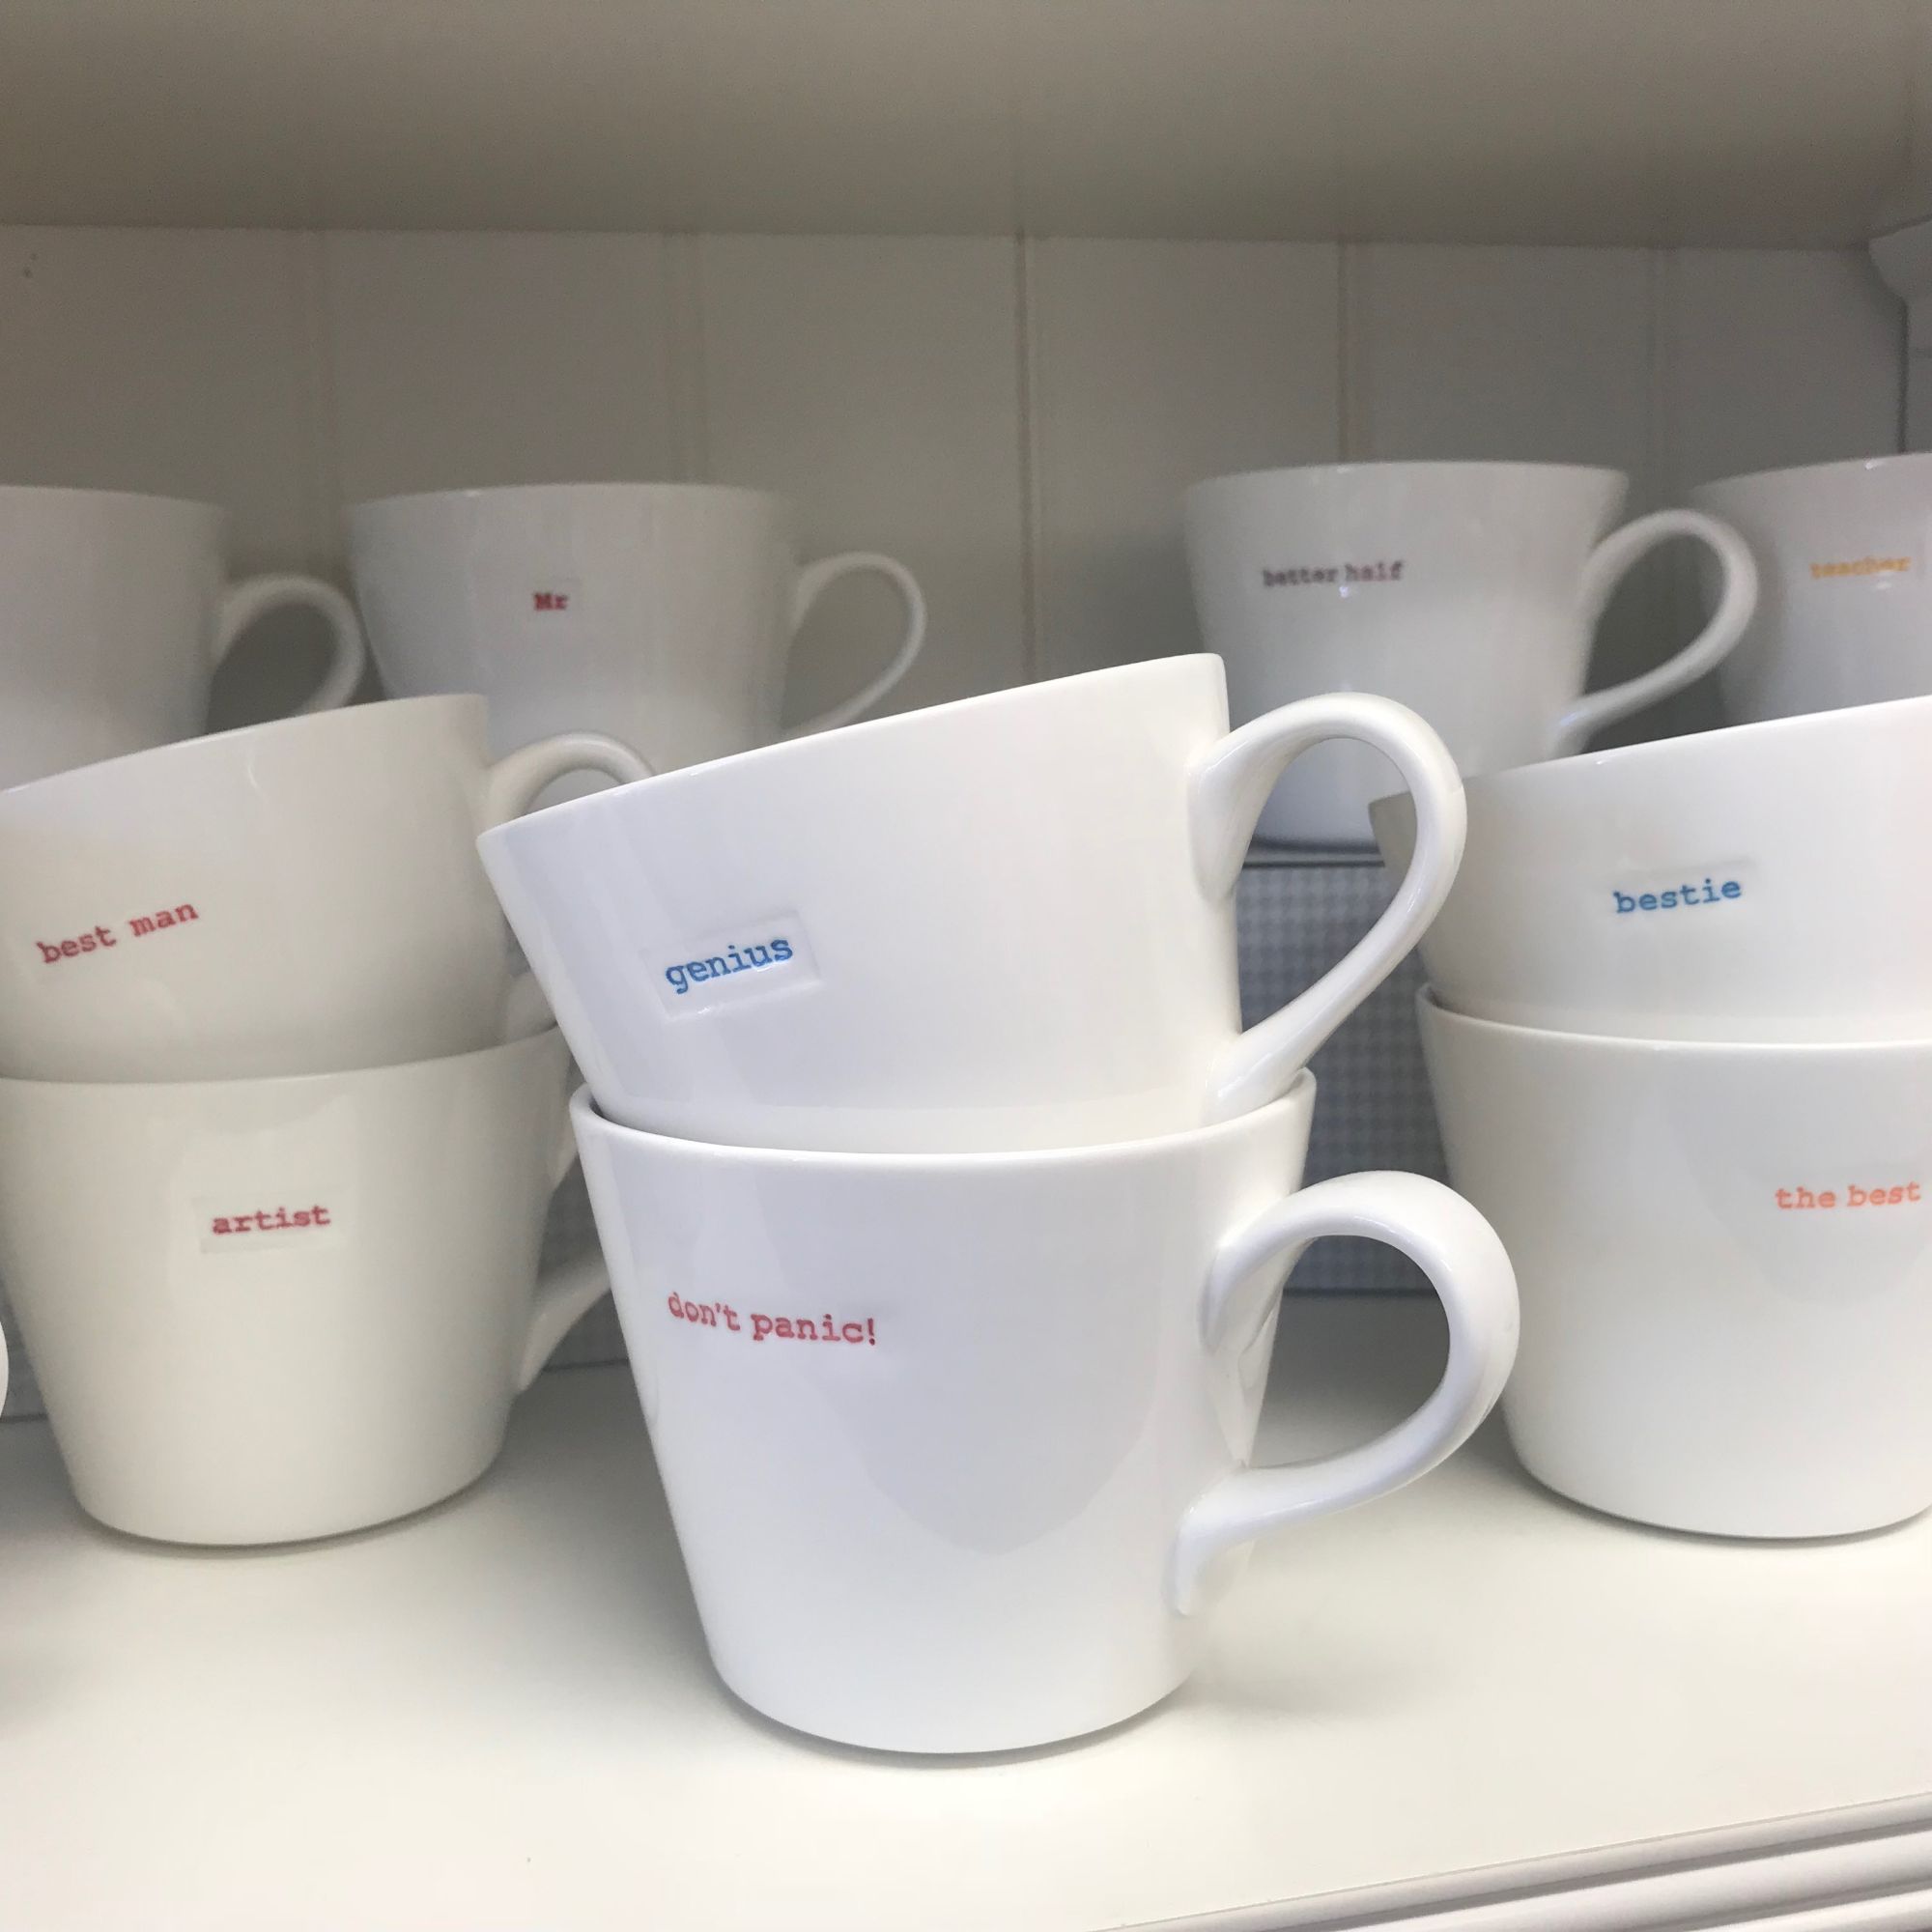 Make International mugs - simple but they say it all!